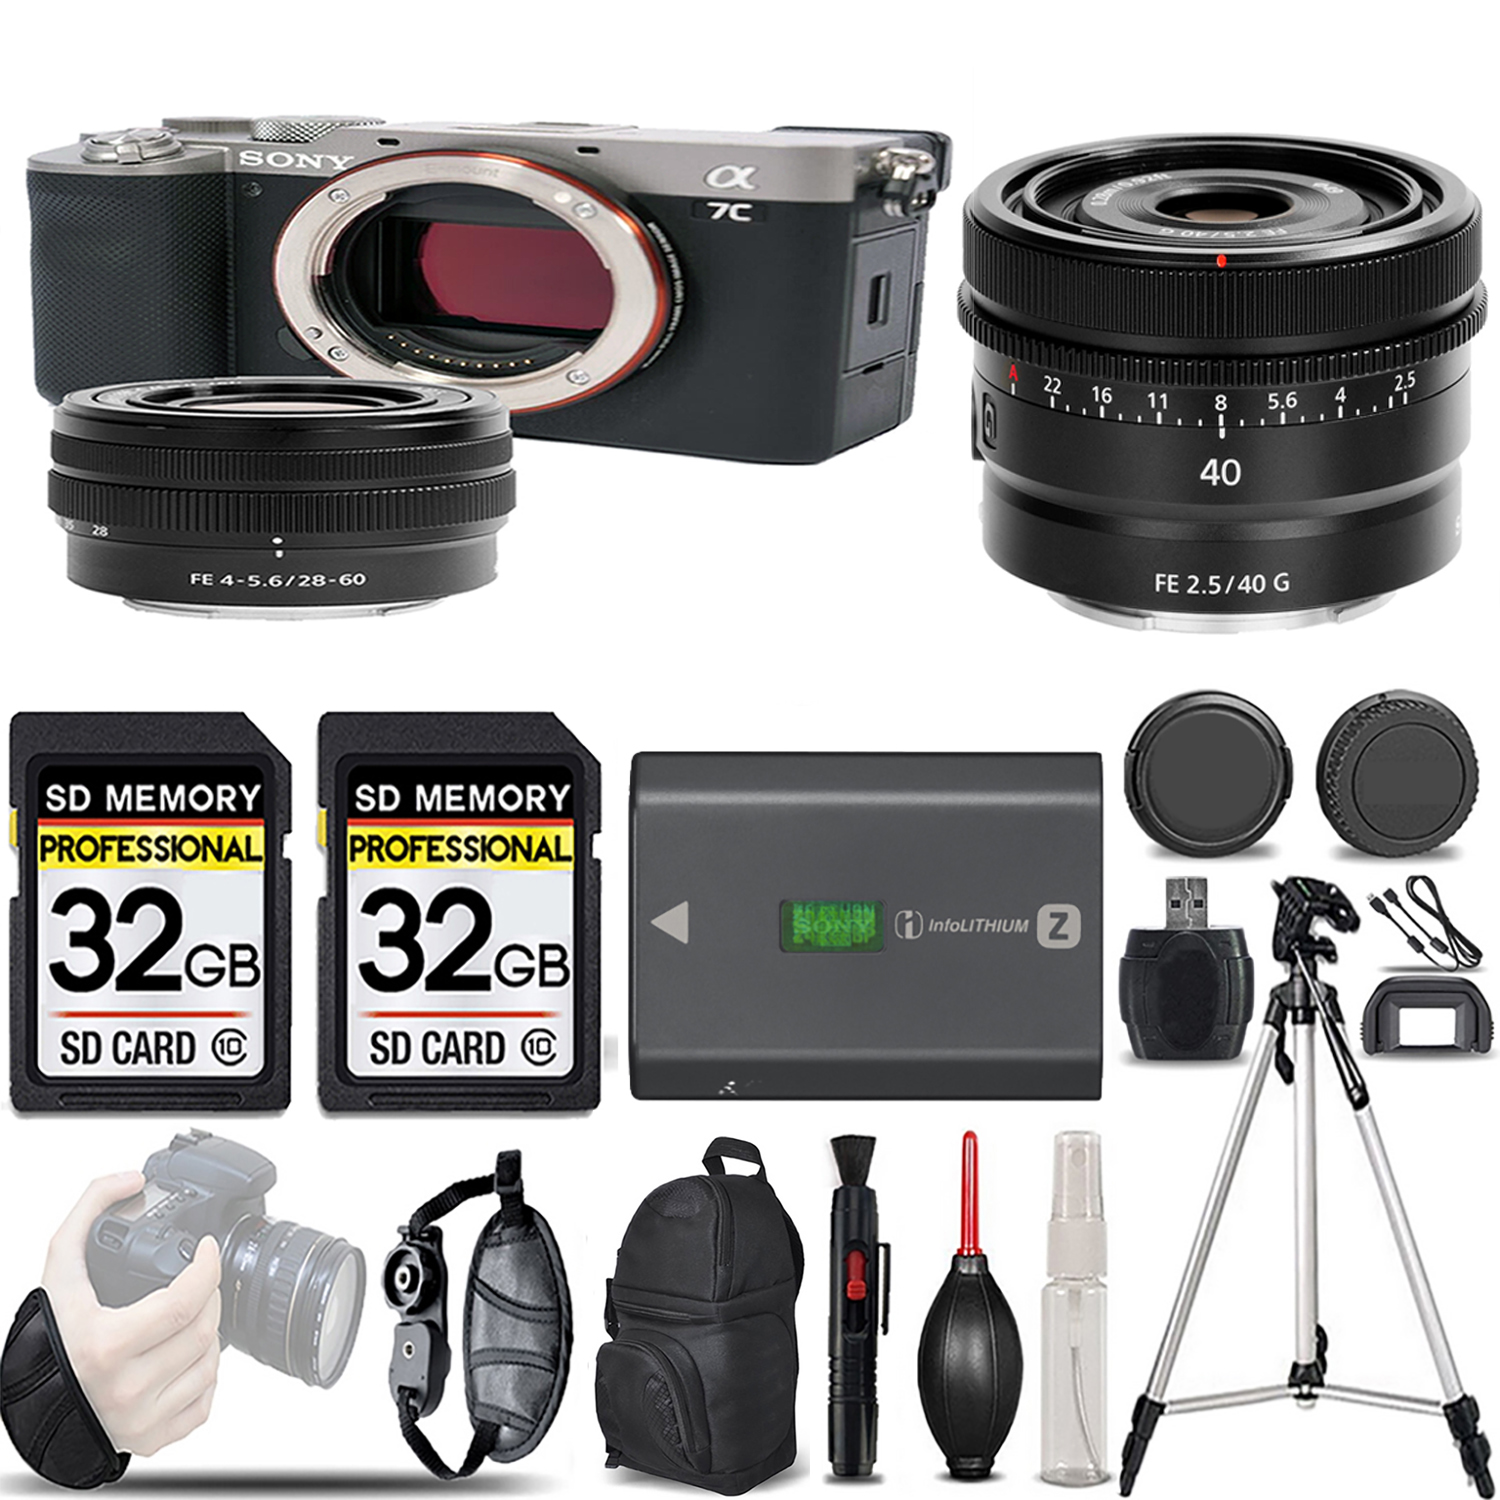 Alpha a7C Mirrorless Camera (Silver) + 28-60mm Lens + 40mm f/2.5 G Lens - LOADED KIT *FREE SHIPPING*